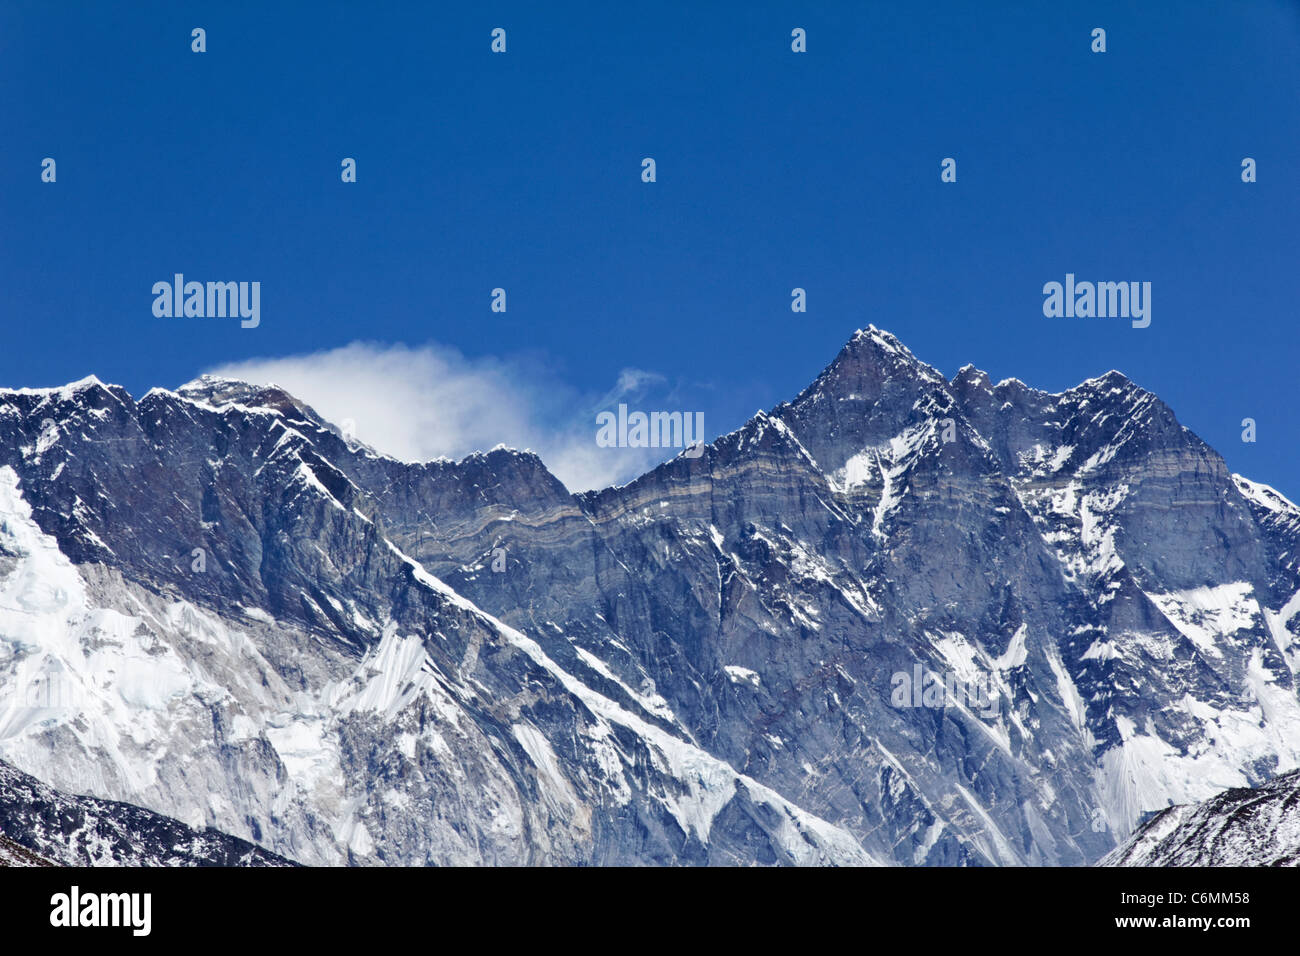 Lhotse and Nuptse mountains with the plume blowing from the summit of Everest behind them, Nepal Stock Photo